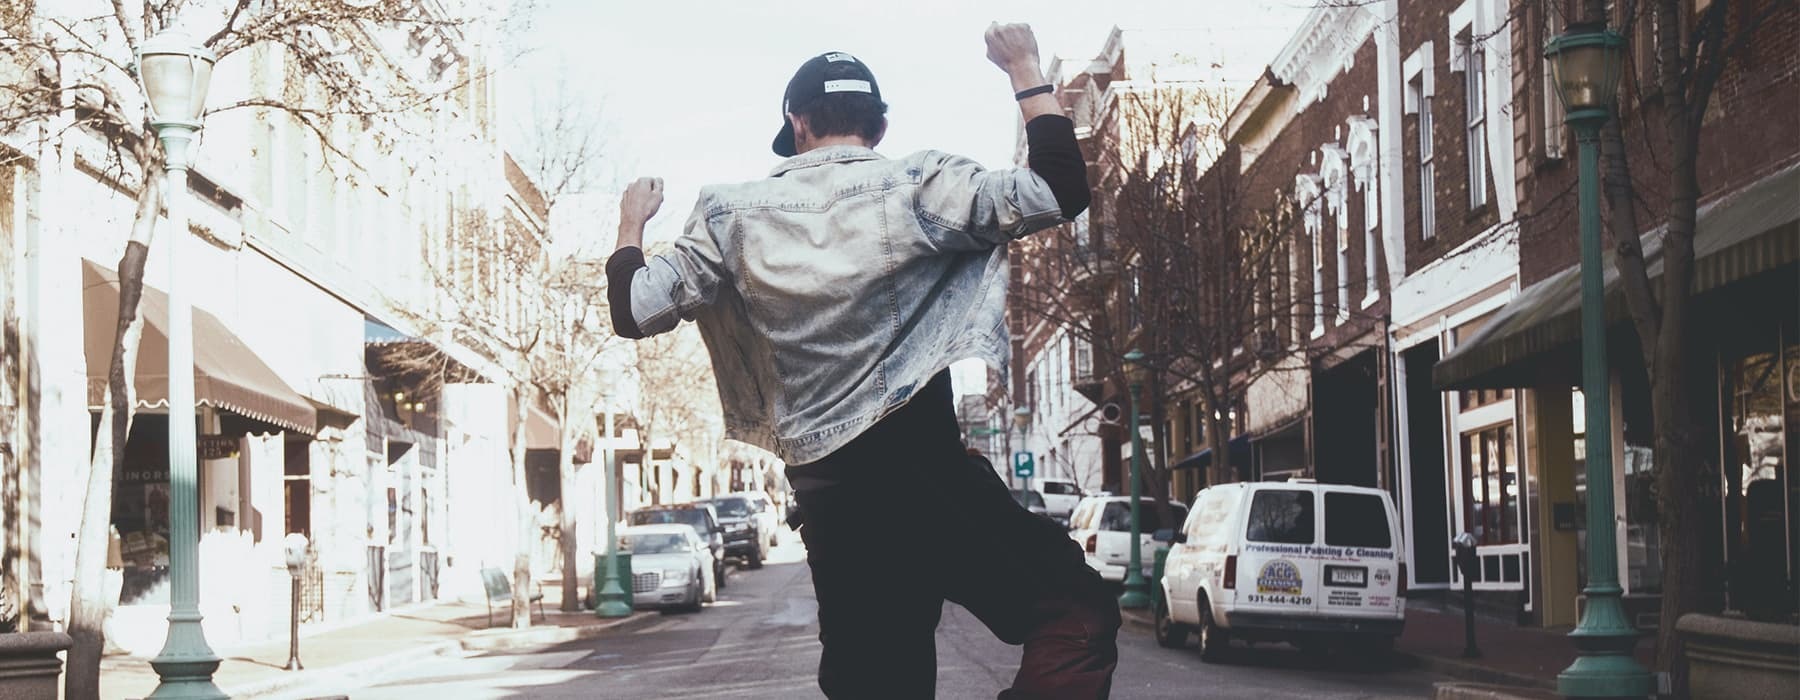 lifestyle image of a man jumping up in style in a neighborhood street